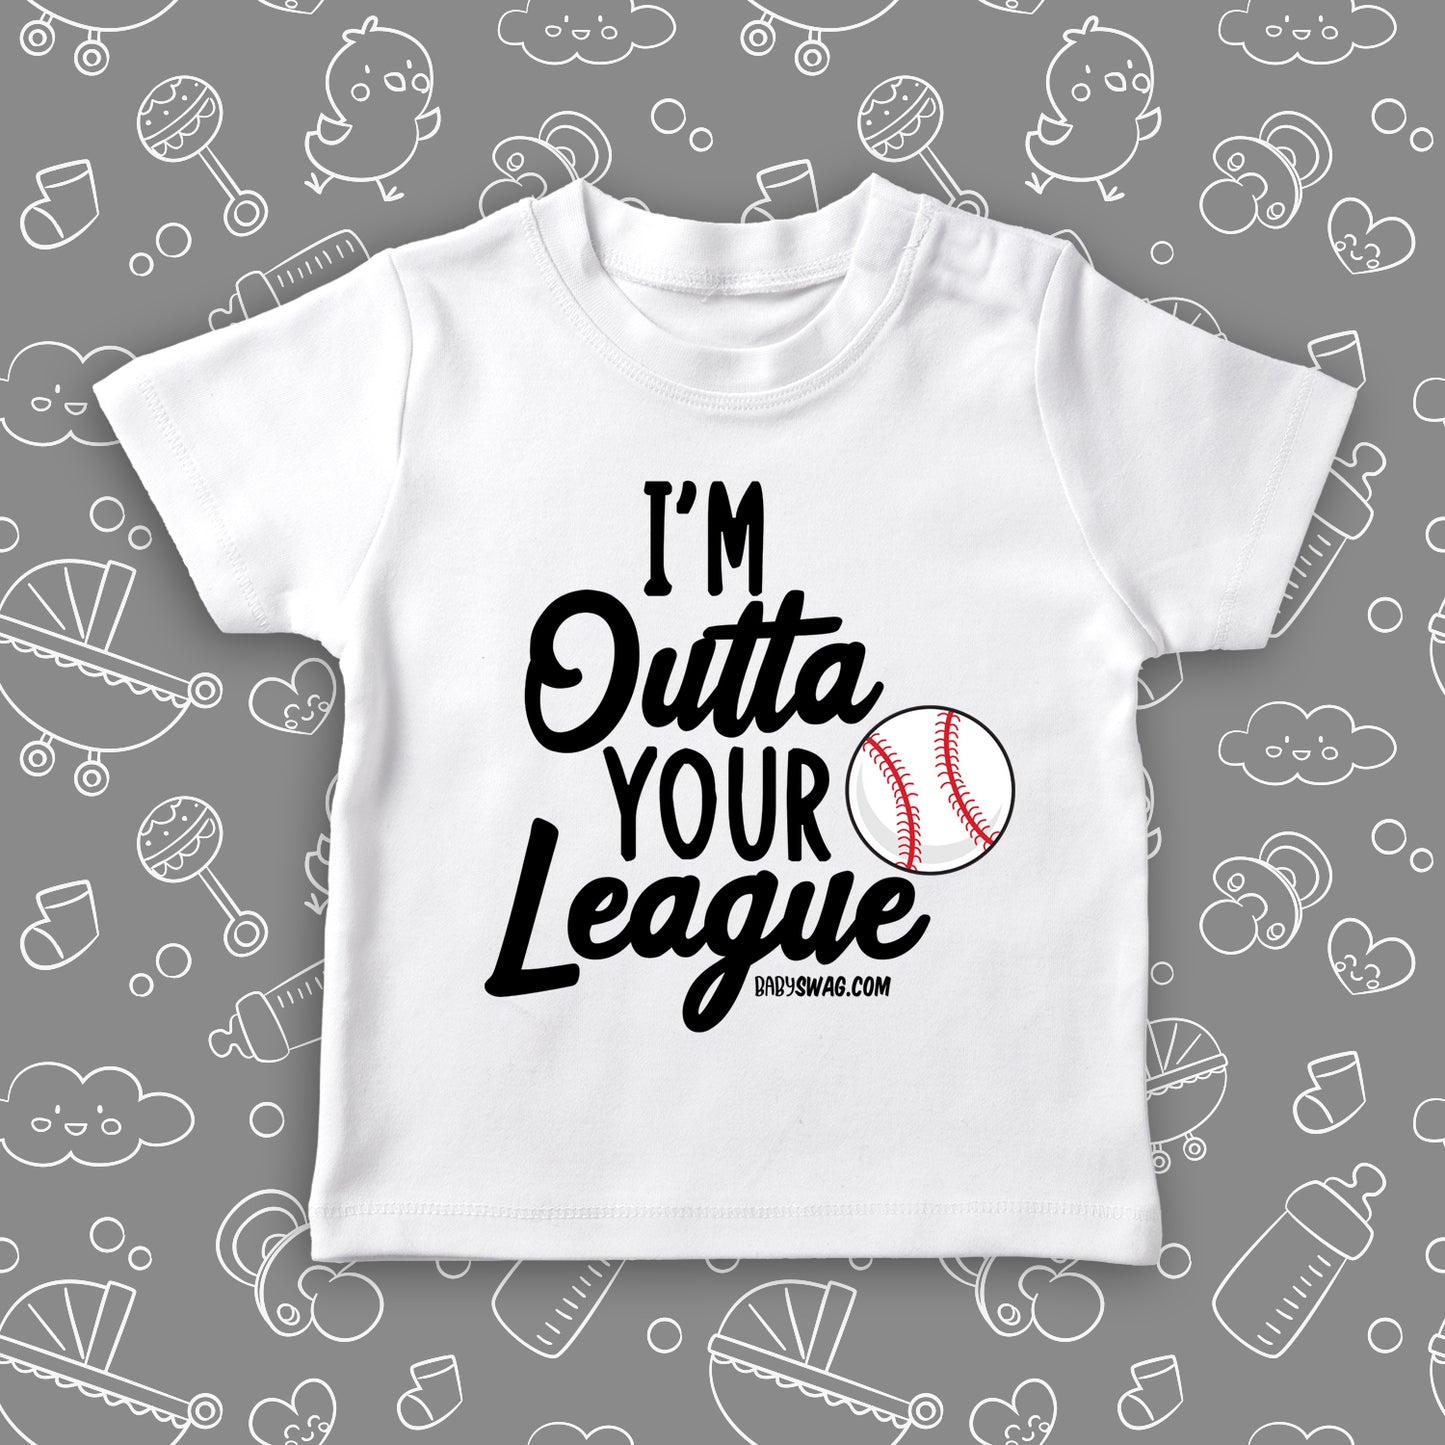 Toddler boy shirt with saying "I'm Outta Your League" in white.